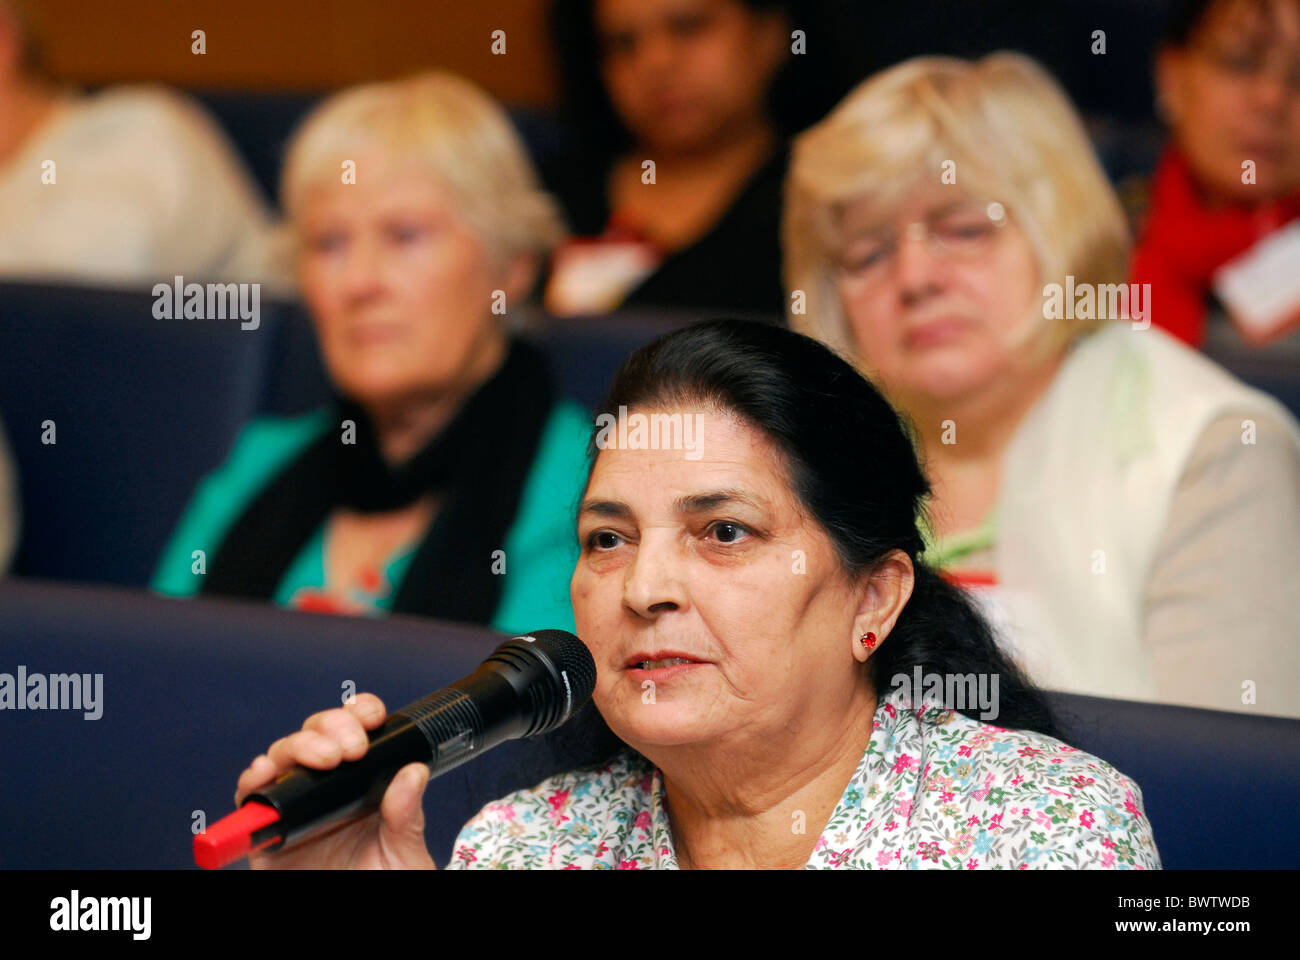 Female delegate public speaking at a conference about caring for dependents, November 2010, London, UK. Stock Photo